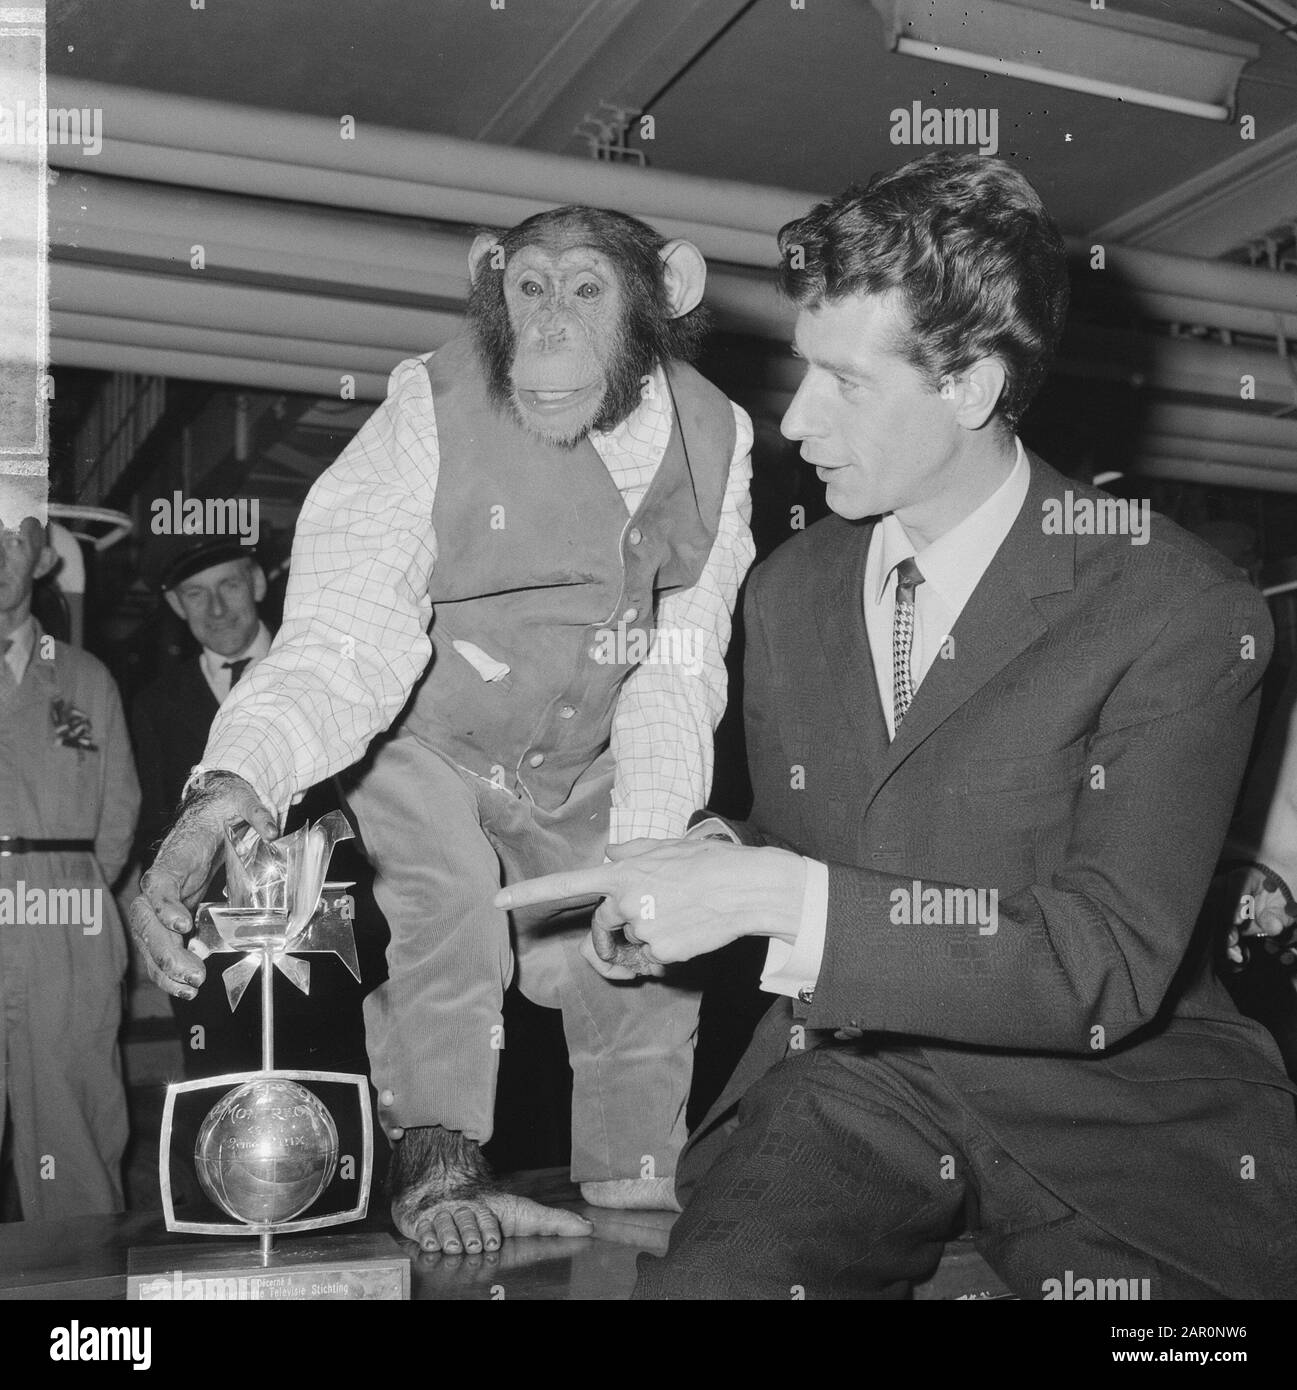 Rudi Carrell won the silver rose. Rudi Carrell with chimpanzee Plato playing in his show Date: 25 april 1964 Location: Noord-Holland, Schiphol Keywords: arrivals, chimpanzees Personal name: Carrell, Rudi, Chimpansee Plato Institution name: Silver Rose Stock Photo